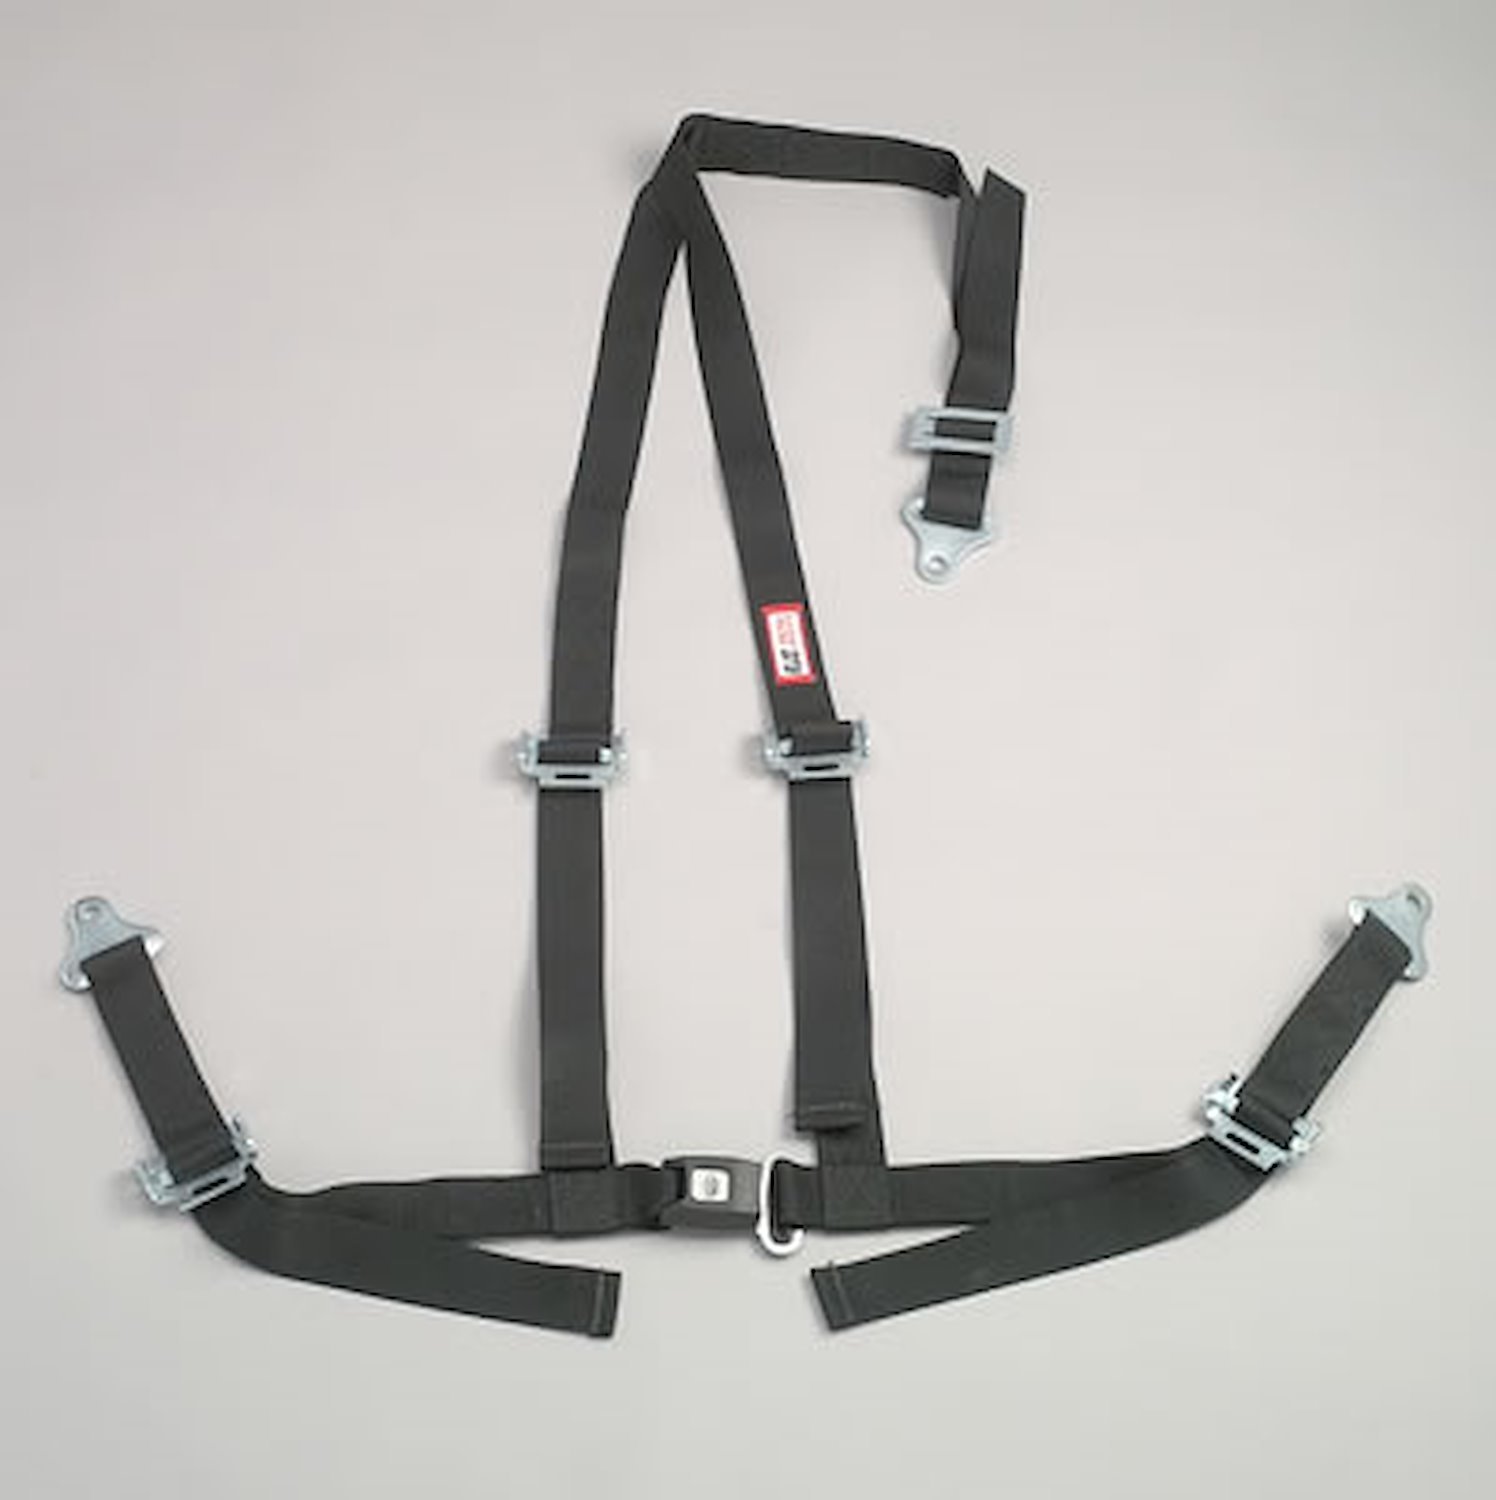 NON-SFI B&T HARNESS 2 PULL UP Lap Belt SNAP 2 S. H. Individual ROLL BAR Mount WRAP/BOLT w/STERNUM STRAP OD GREEN